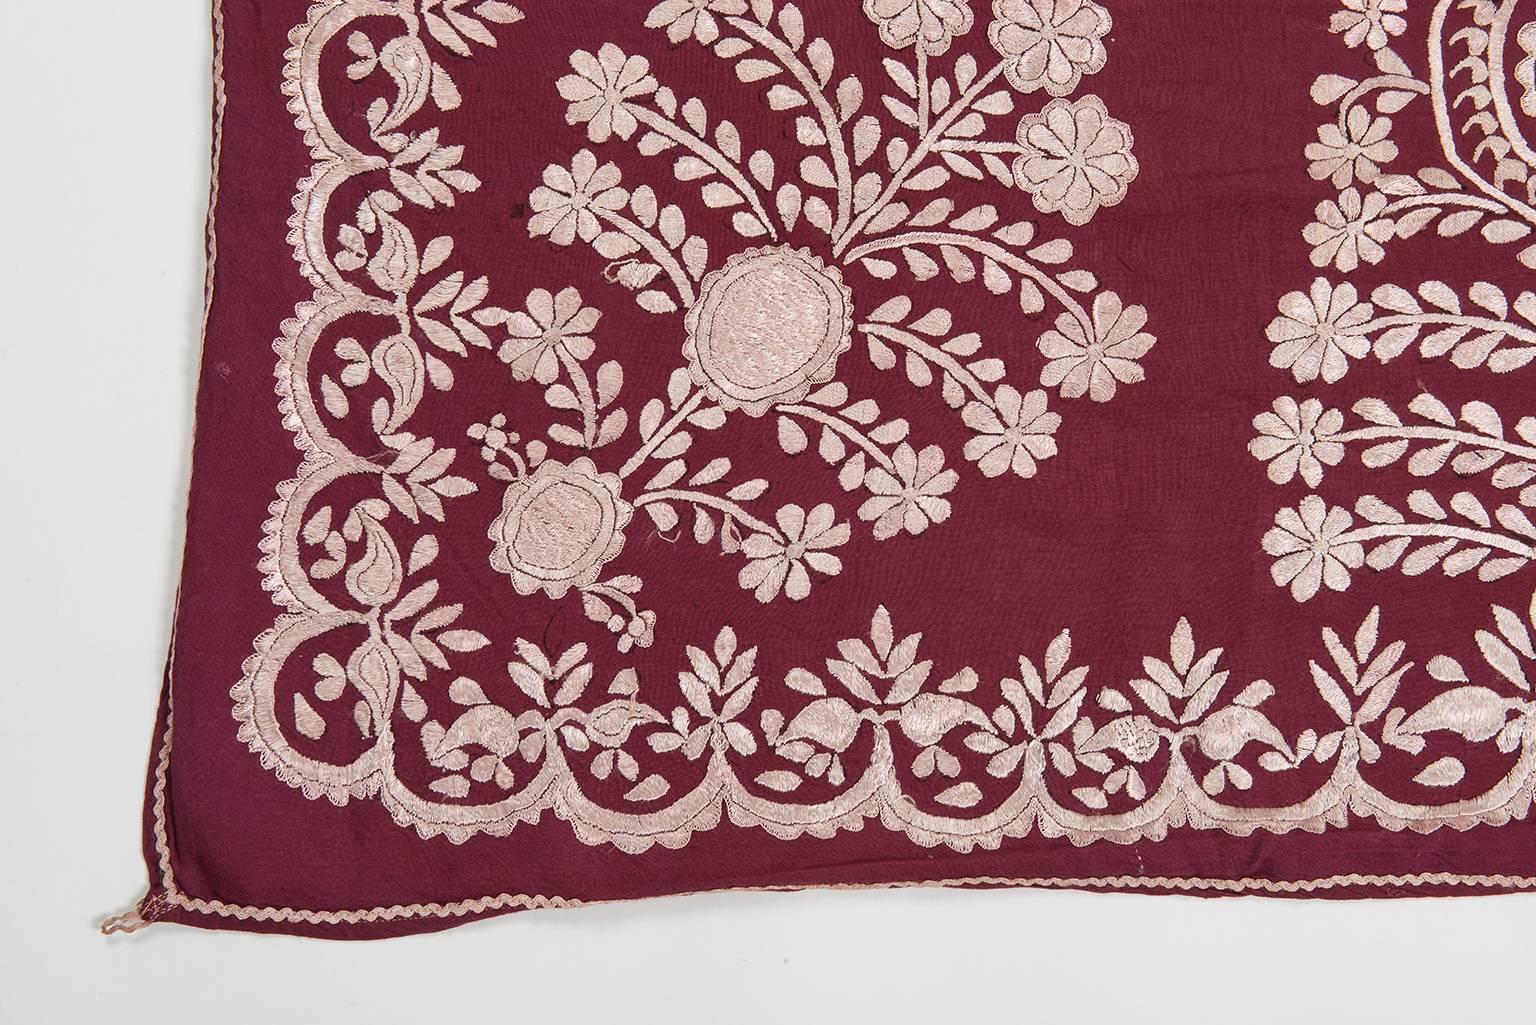 Embroidered Vintage Uzbekistan Suzani, suitable for bed, table or wall hanging